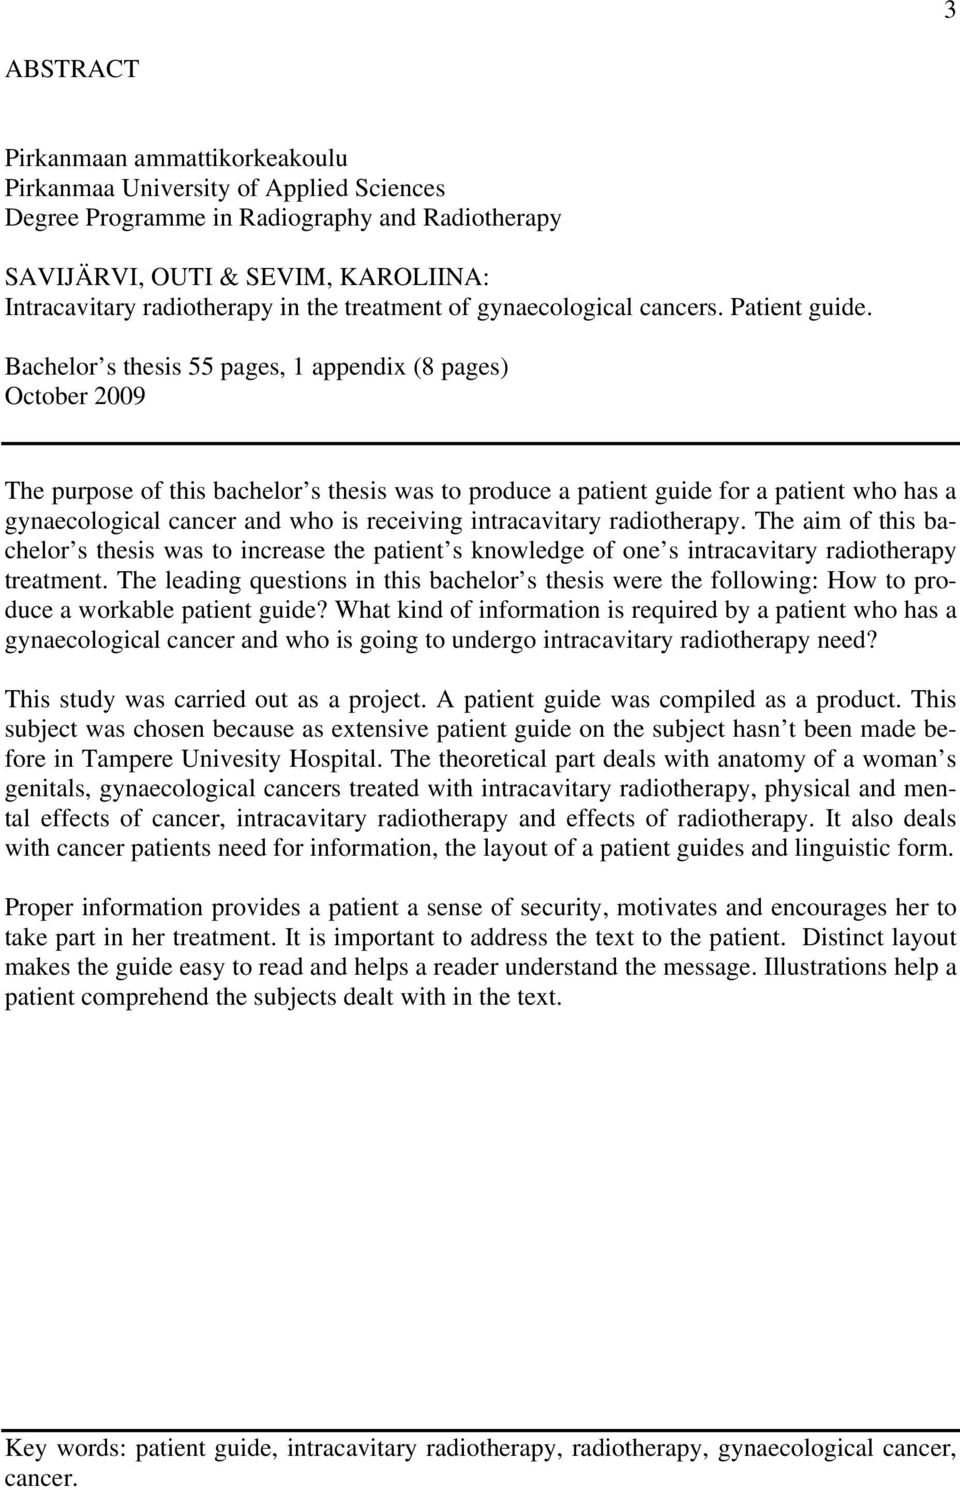 Bachelor s thesis 55 pages, 1 appendix (8 pages) October 2009 The purpose of this bachelor s thesis was to produce a patient guide for a patient who has a gynaecological cancer and who is receiving